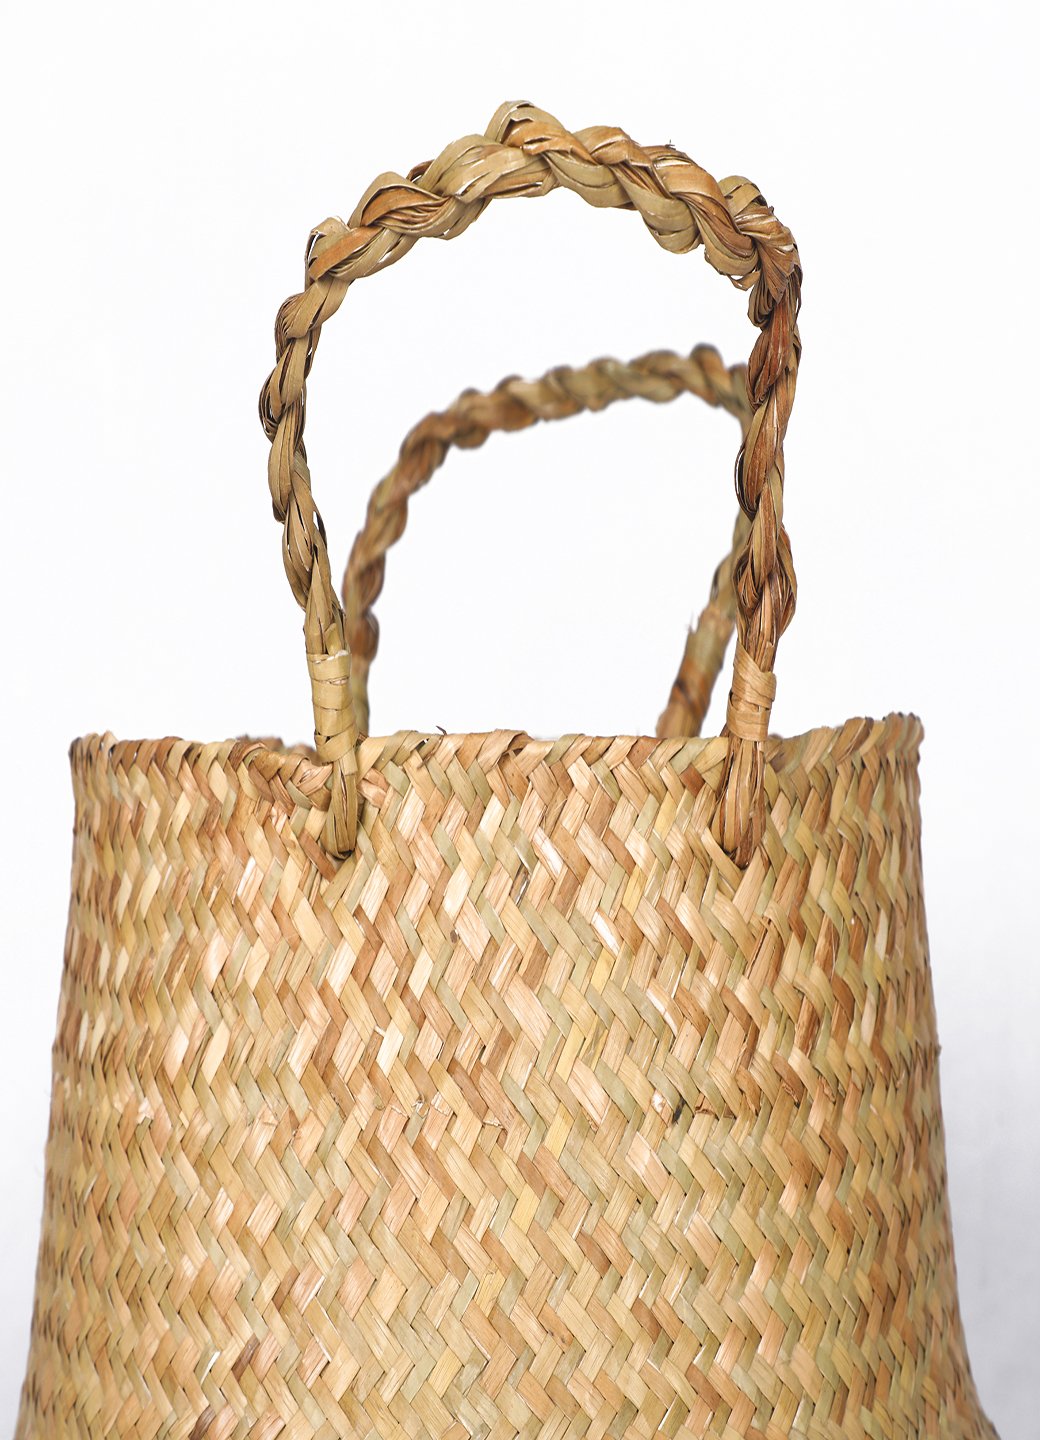 Pollination Natural Plush Woven Seagrass Black Tote Belly Seagrass Woven Basket  (Small, Pack of 1) - Artificial Flowers & Plants - PolliNation